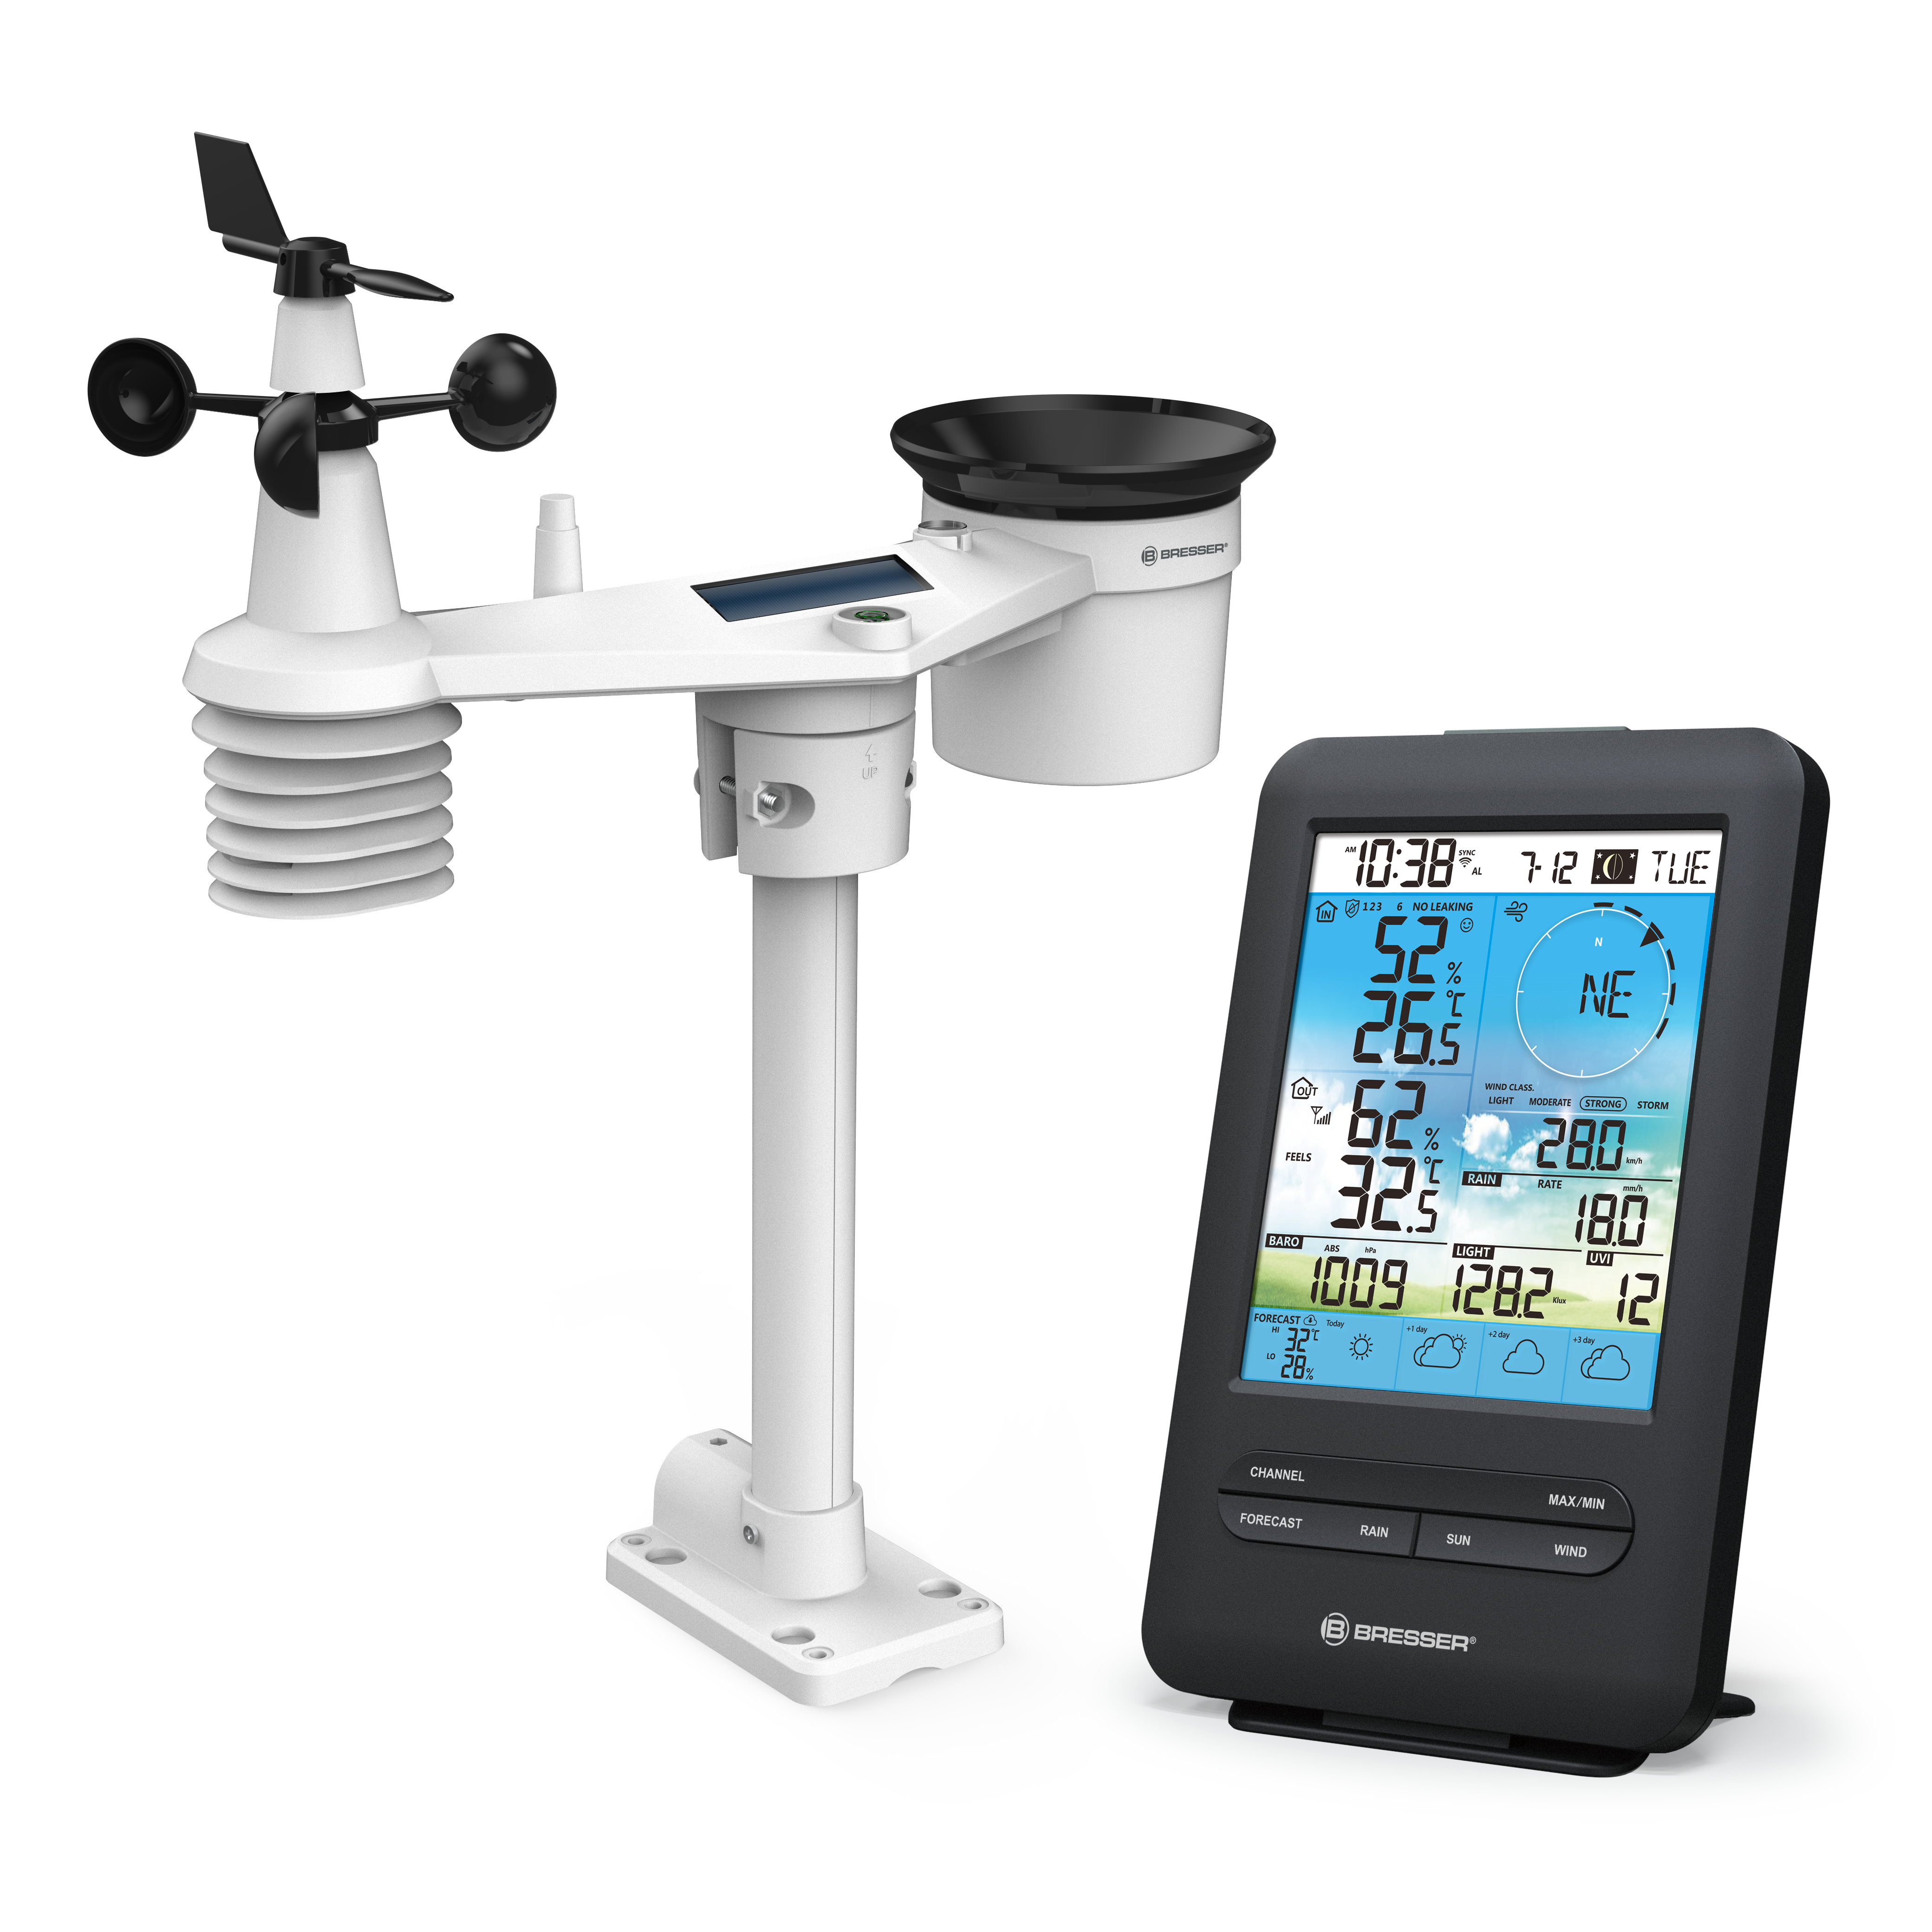 BRESSER 4-Day 4CAST Wi-Fi Weather Station with 7-in-1 Outdoor Sensor